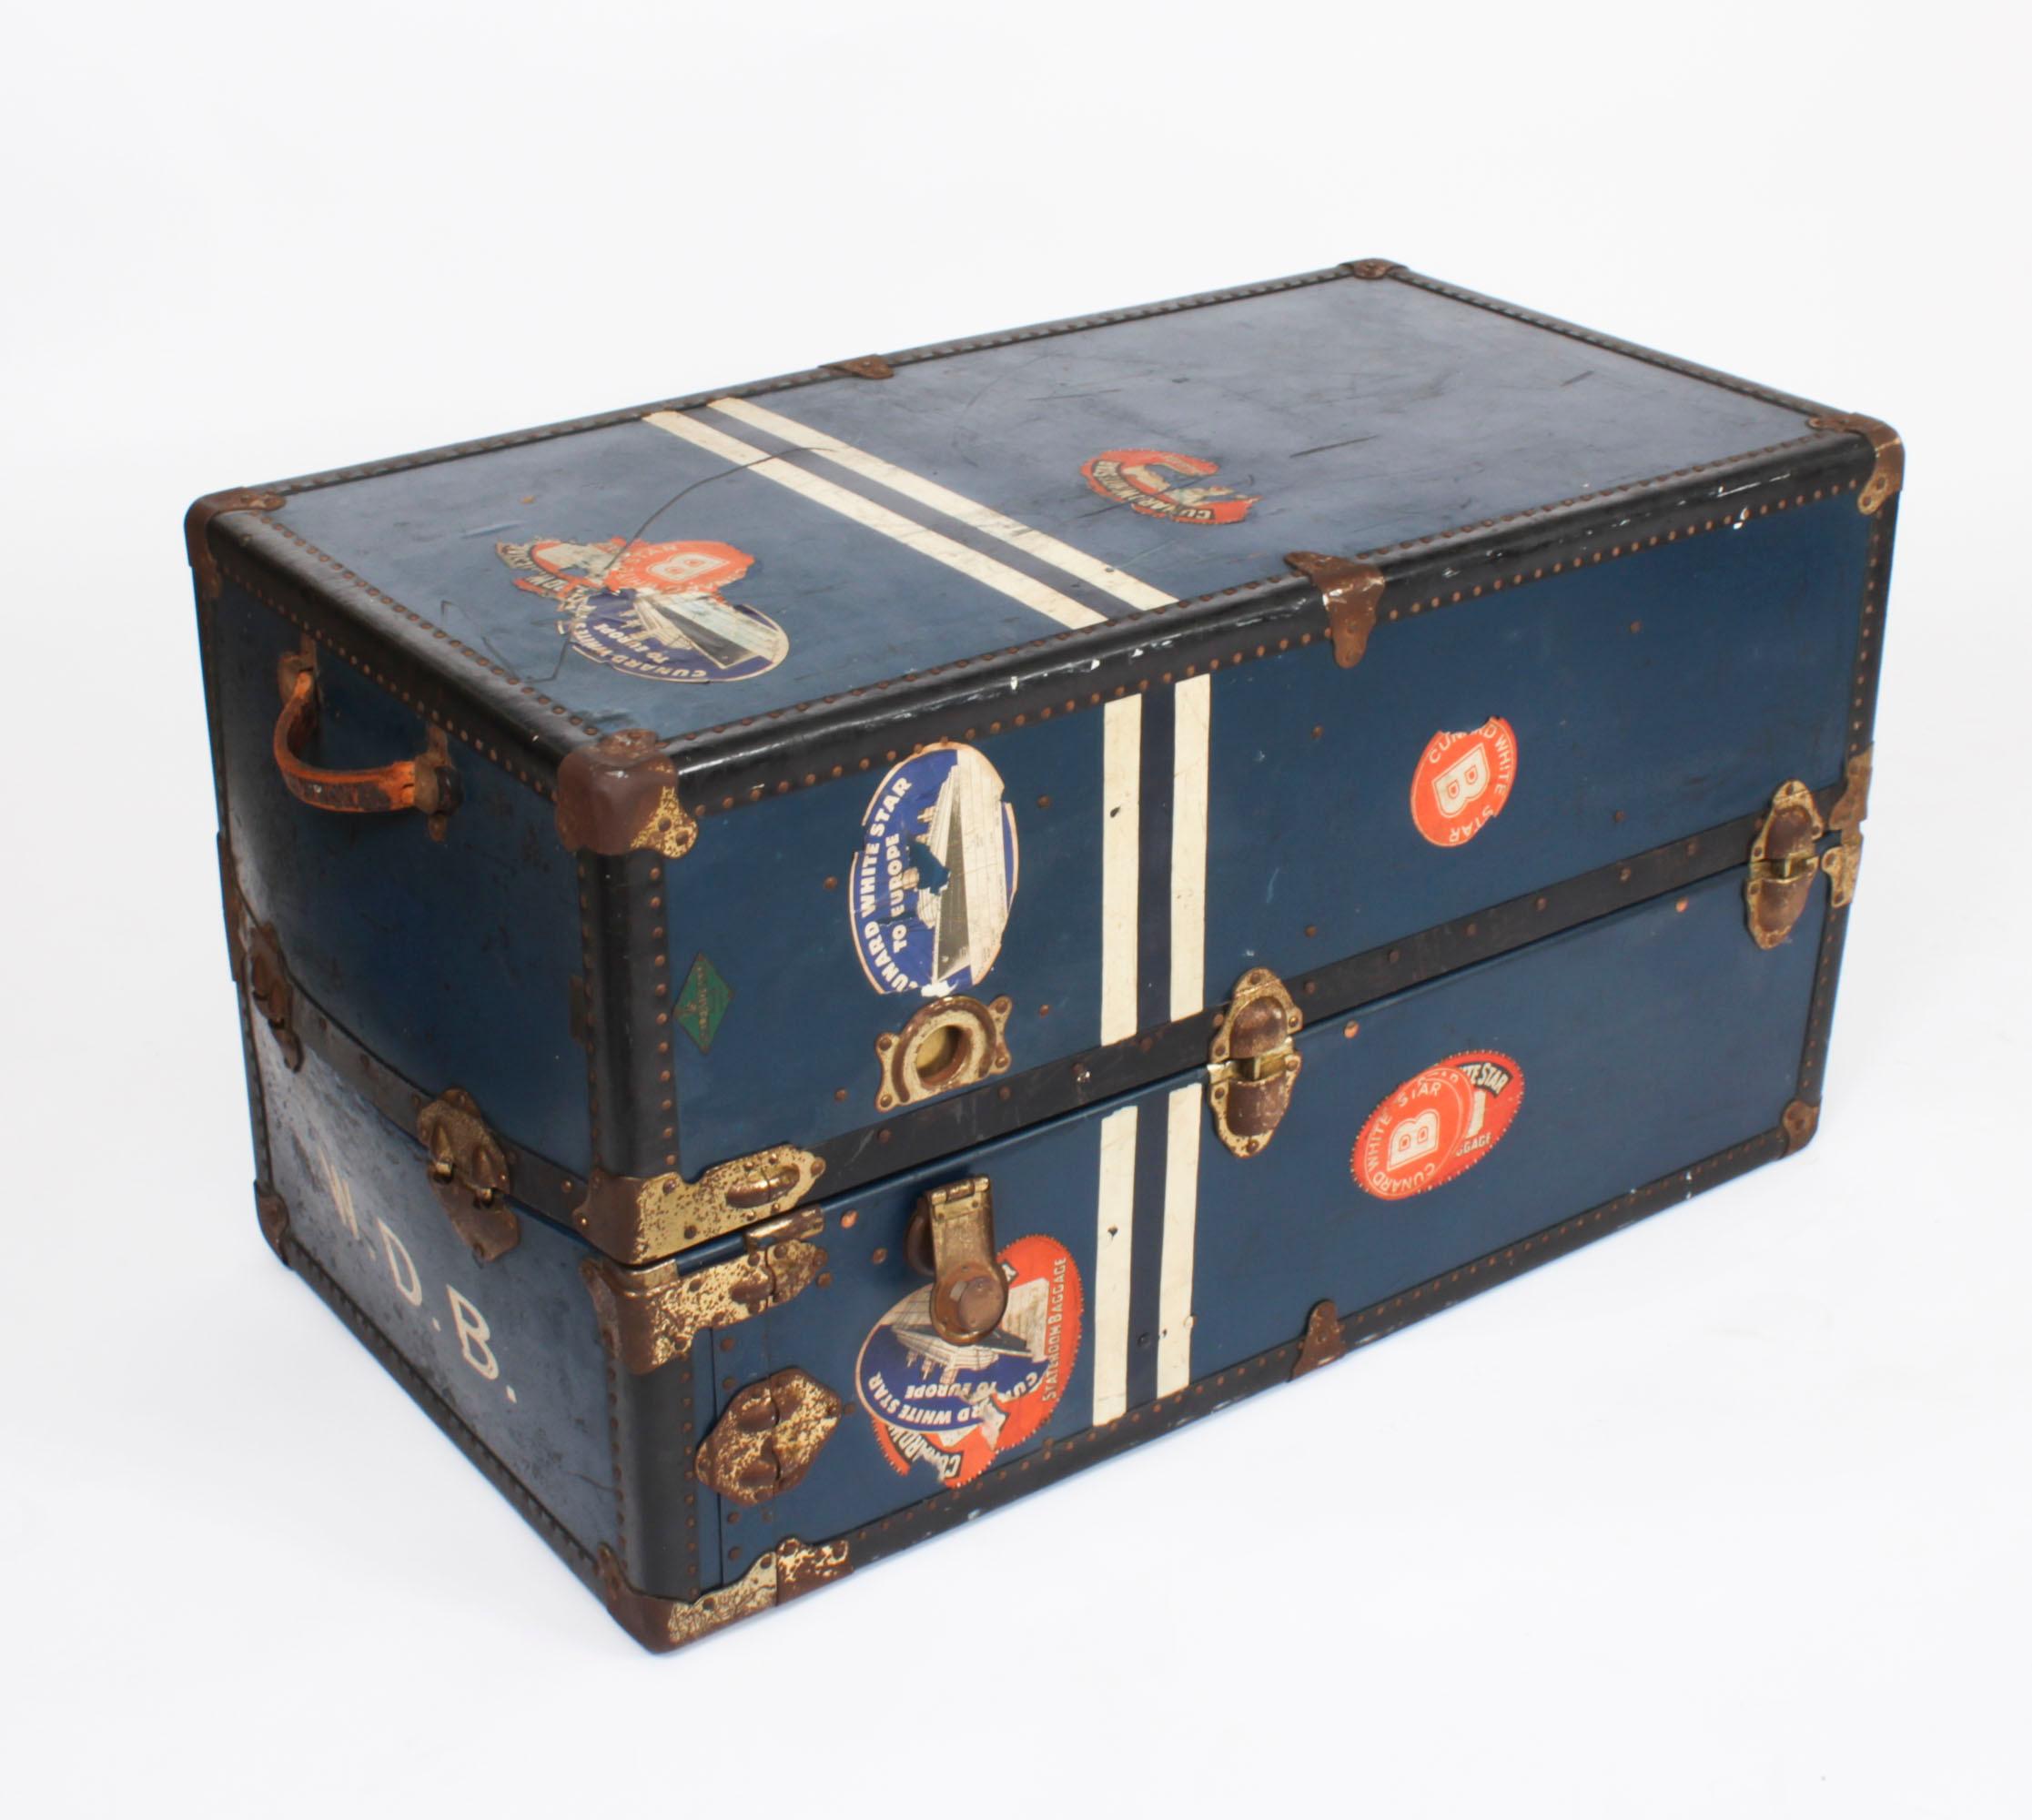 Antique Wardrobe Steamers Trunk Luggage C1930 In Good Condition For Sale In London, GB